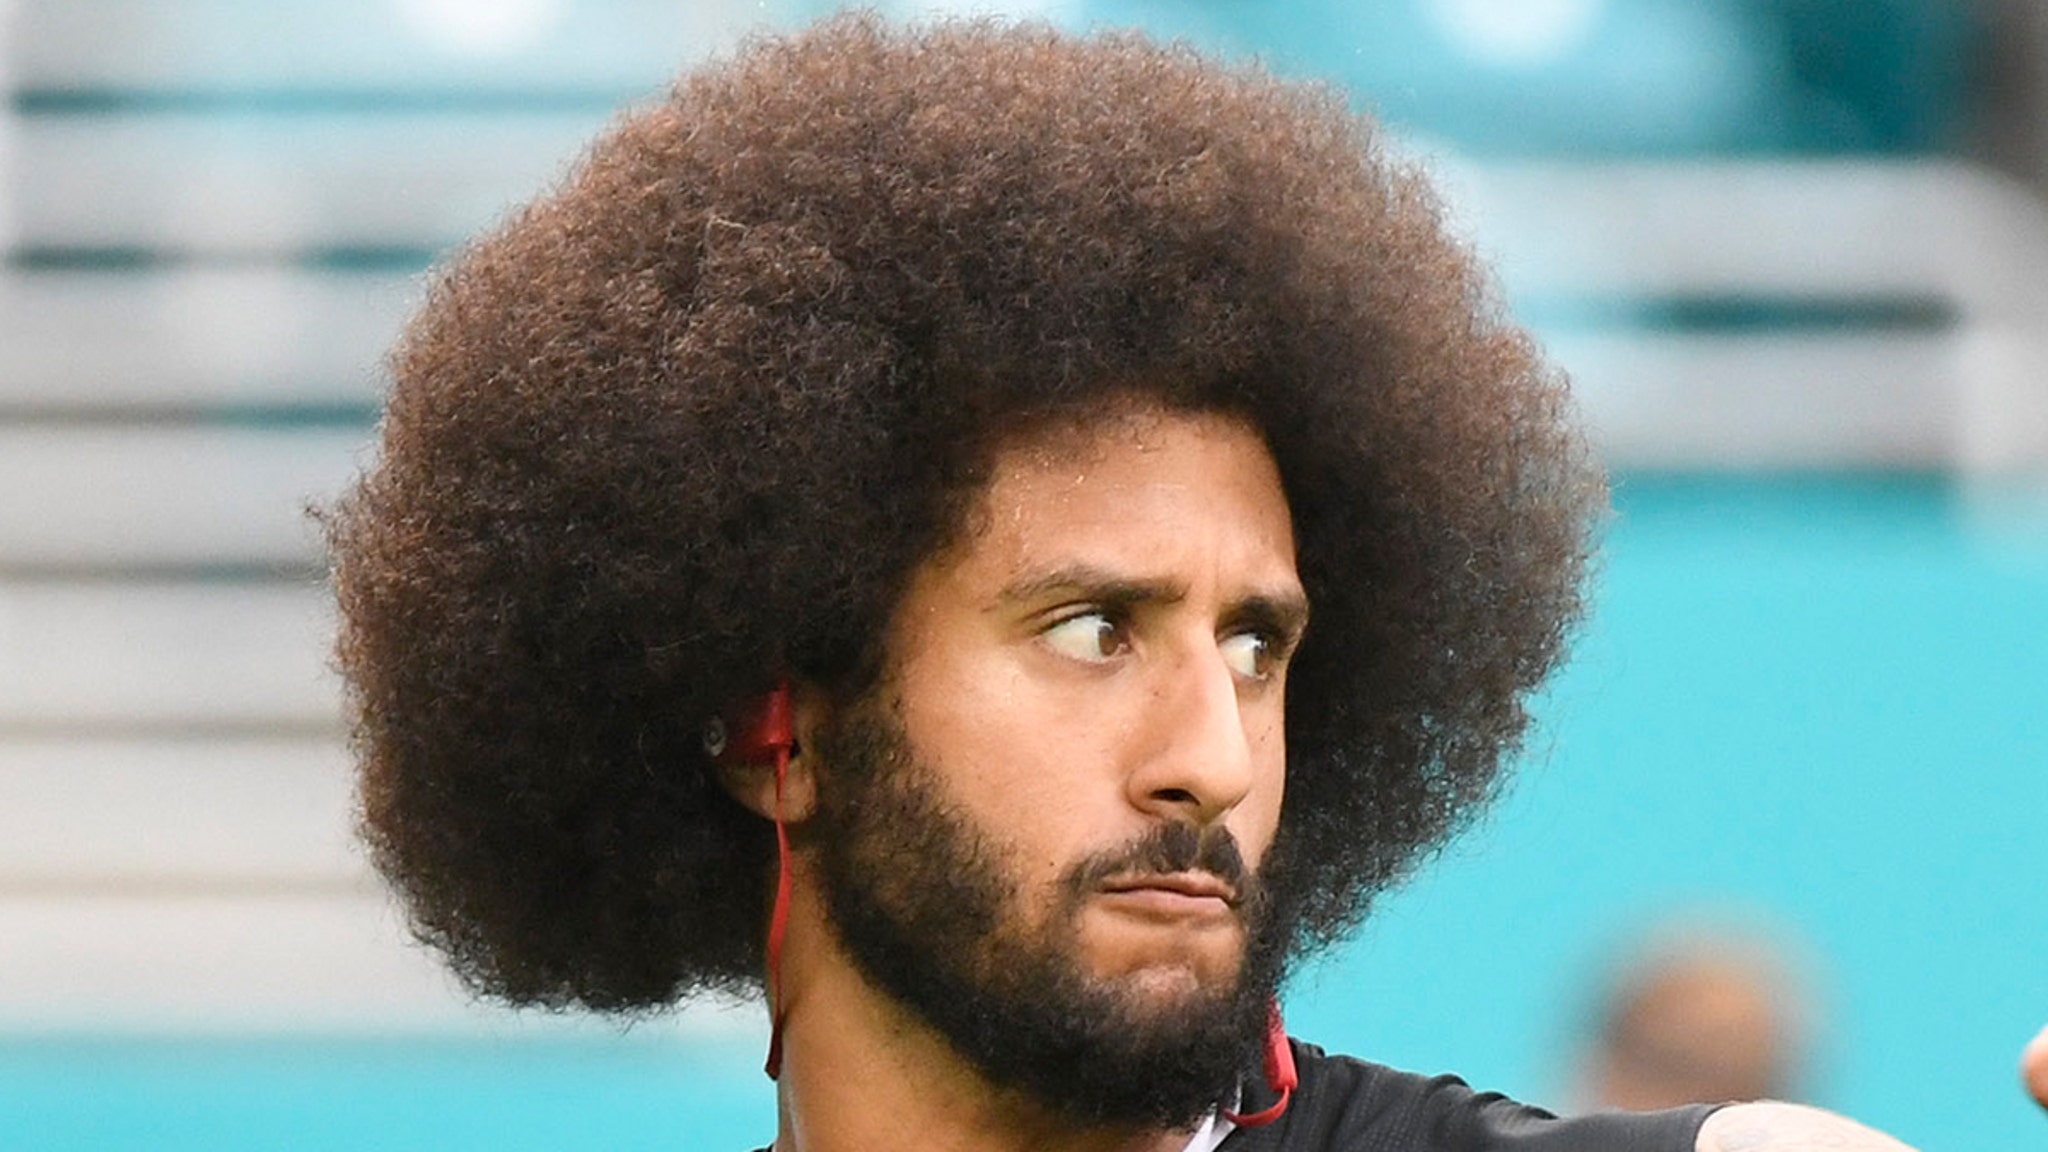 Colin Kaepernick Arrives to New Workout Location in Atlanta